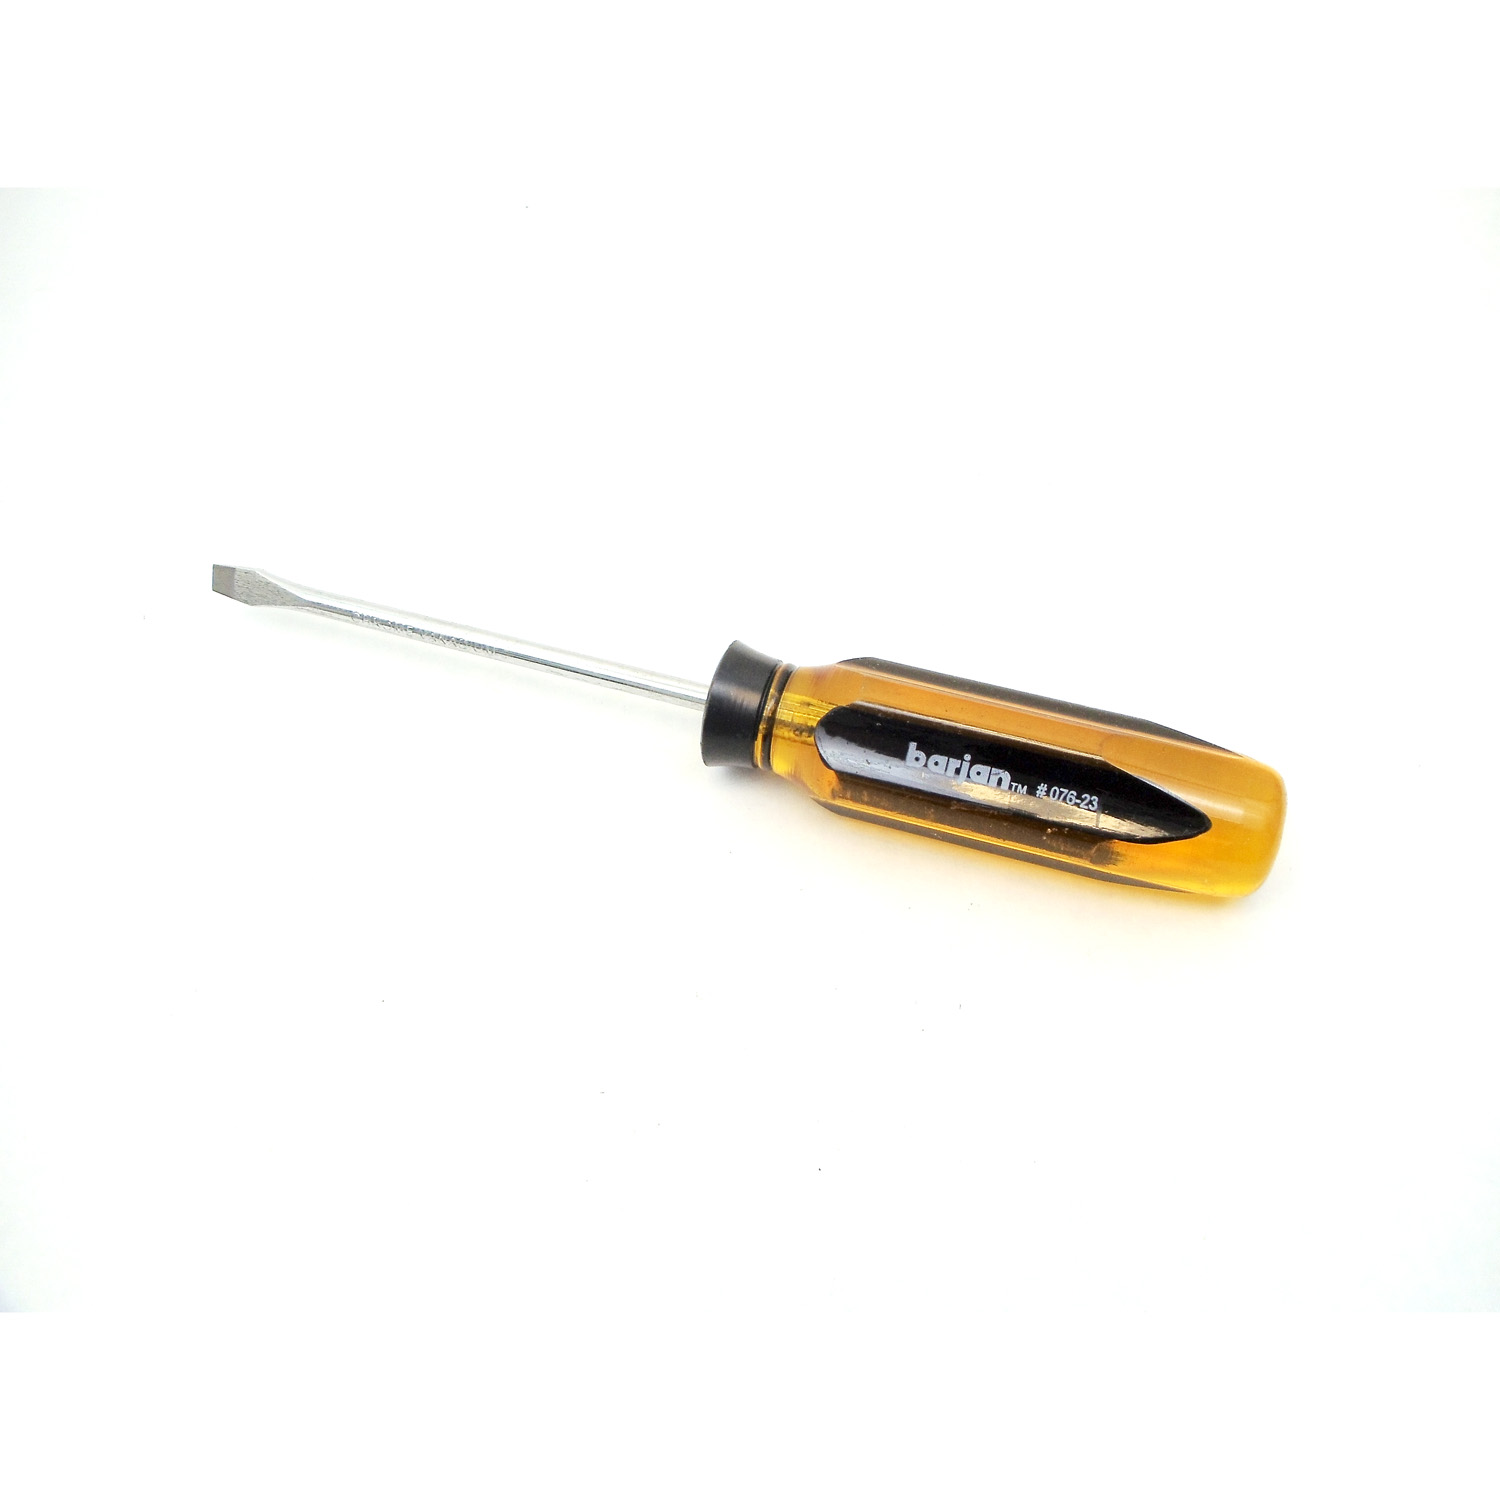 Barjan - 3/16" X 4" Flat Screw Driver With Magnetic Tip